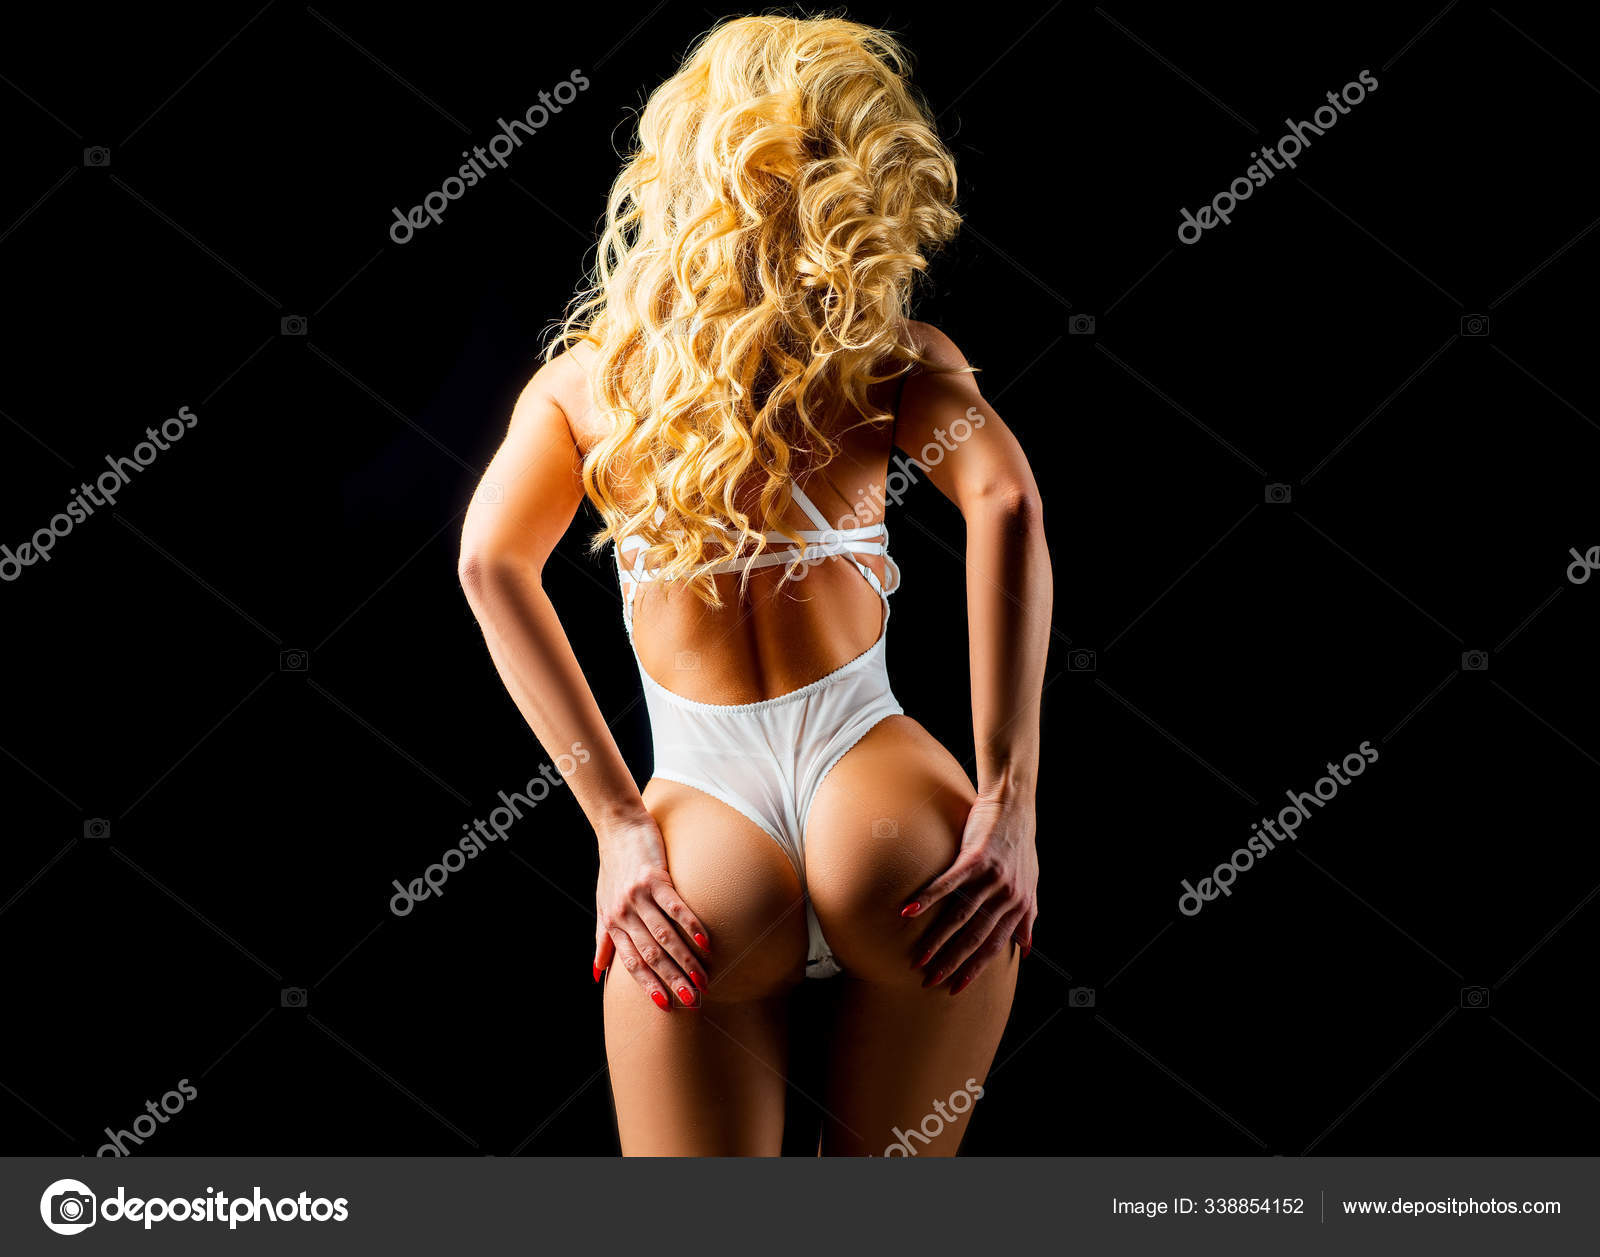 Female sexy buttocks in white panties over black background. Back view of perfect female legs and buttocks. Beautiful athletic female ass in underwear picture picture